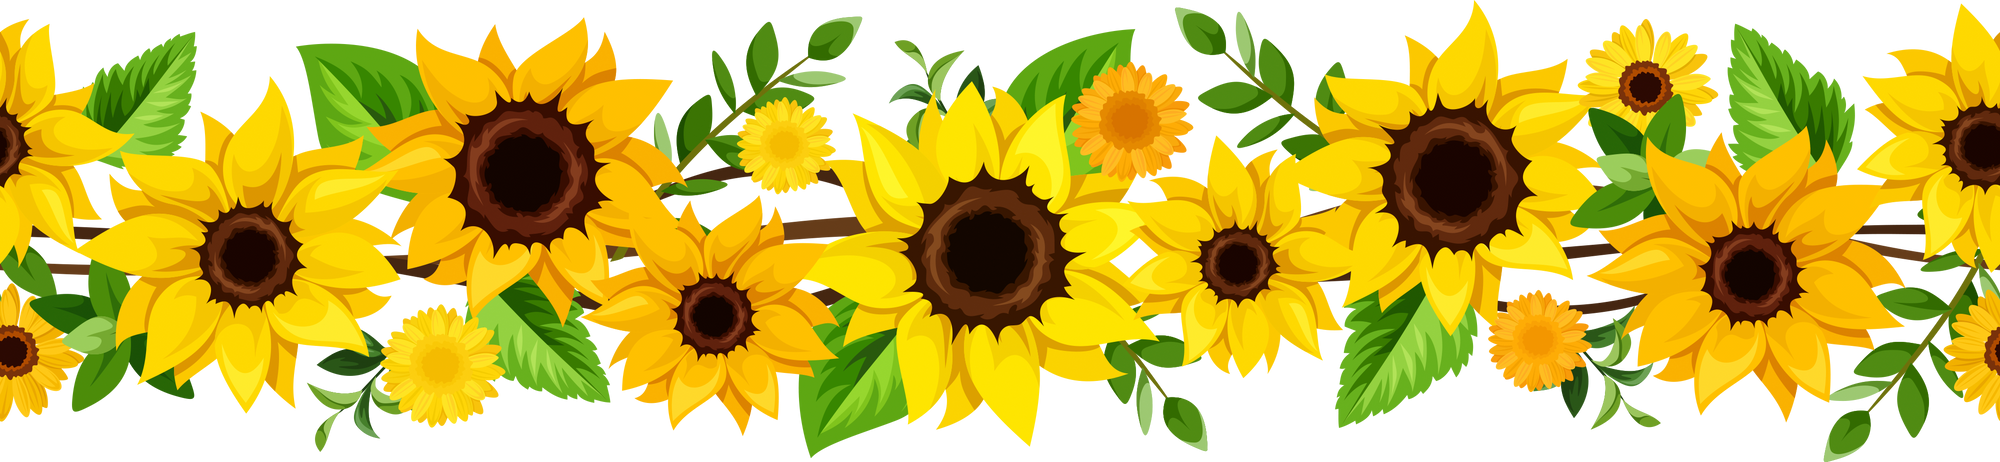 Seamless floral border with sunflowers